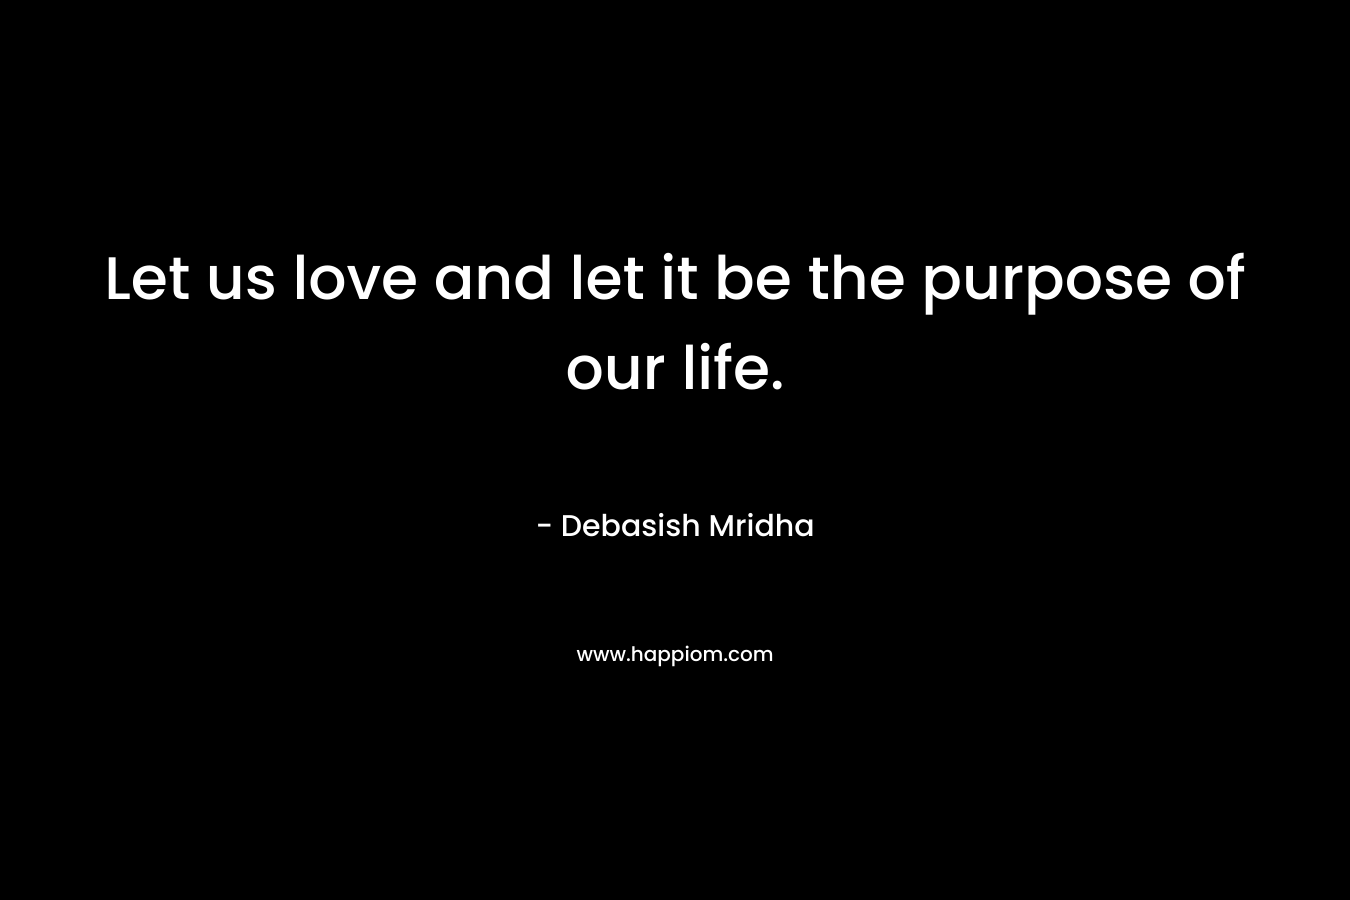 Let us love and let it be the purpose of our life.